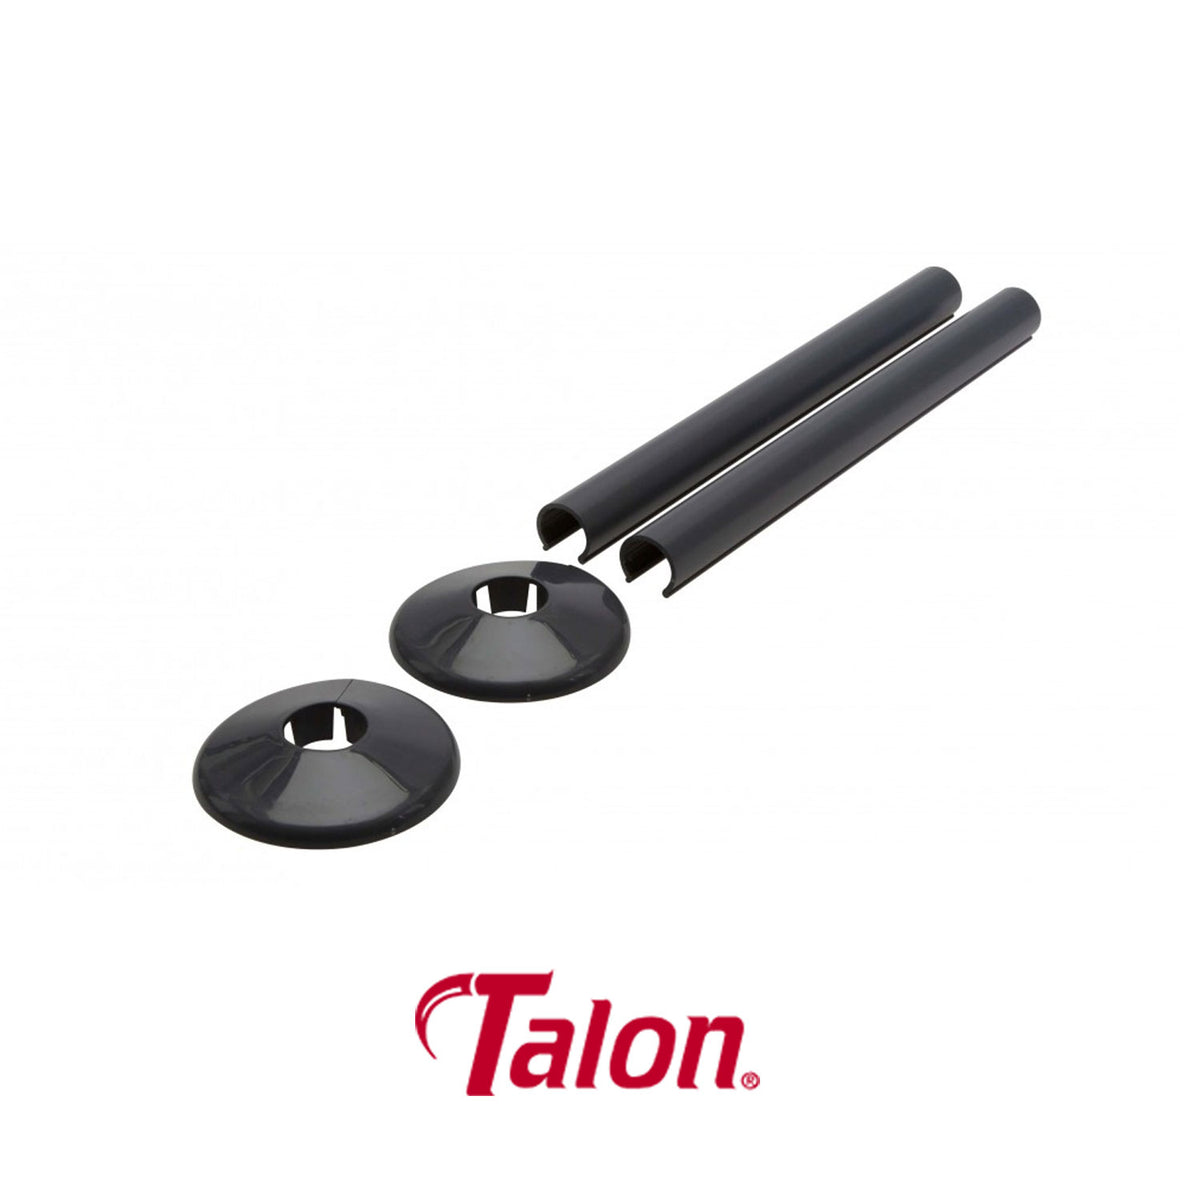 Talon Snappit Towel Rail Radiator Pipe Covers Anthracite